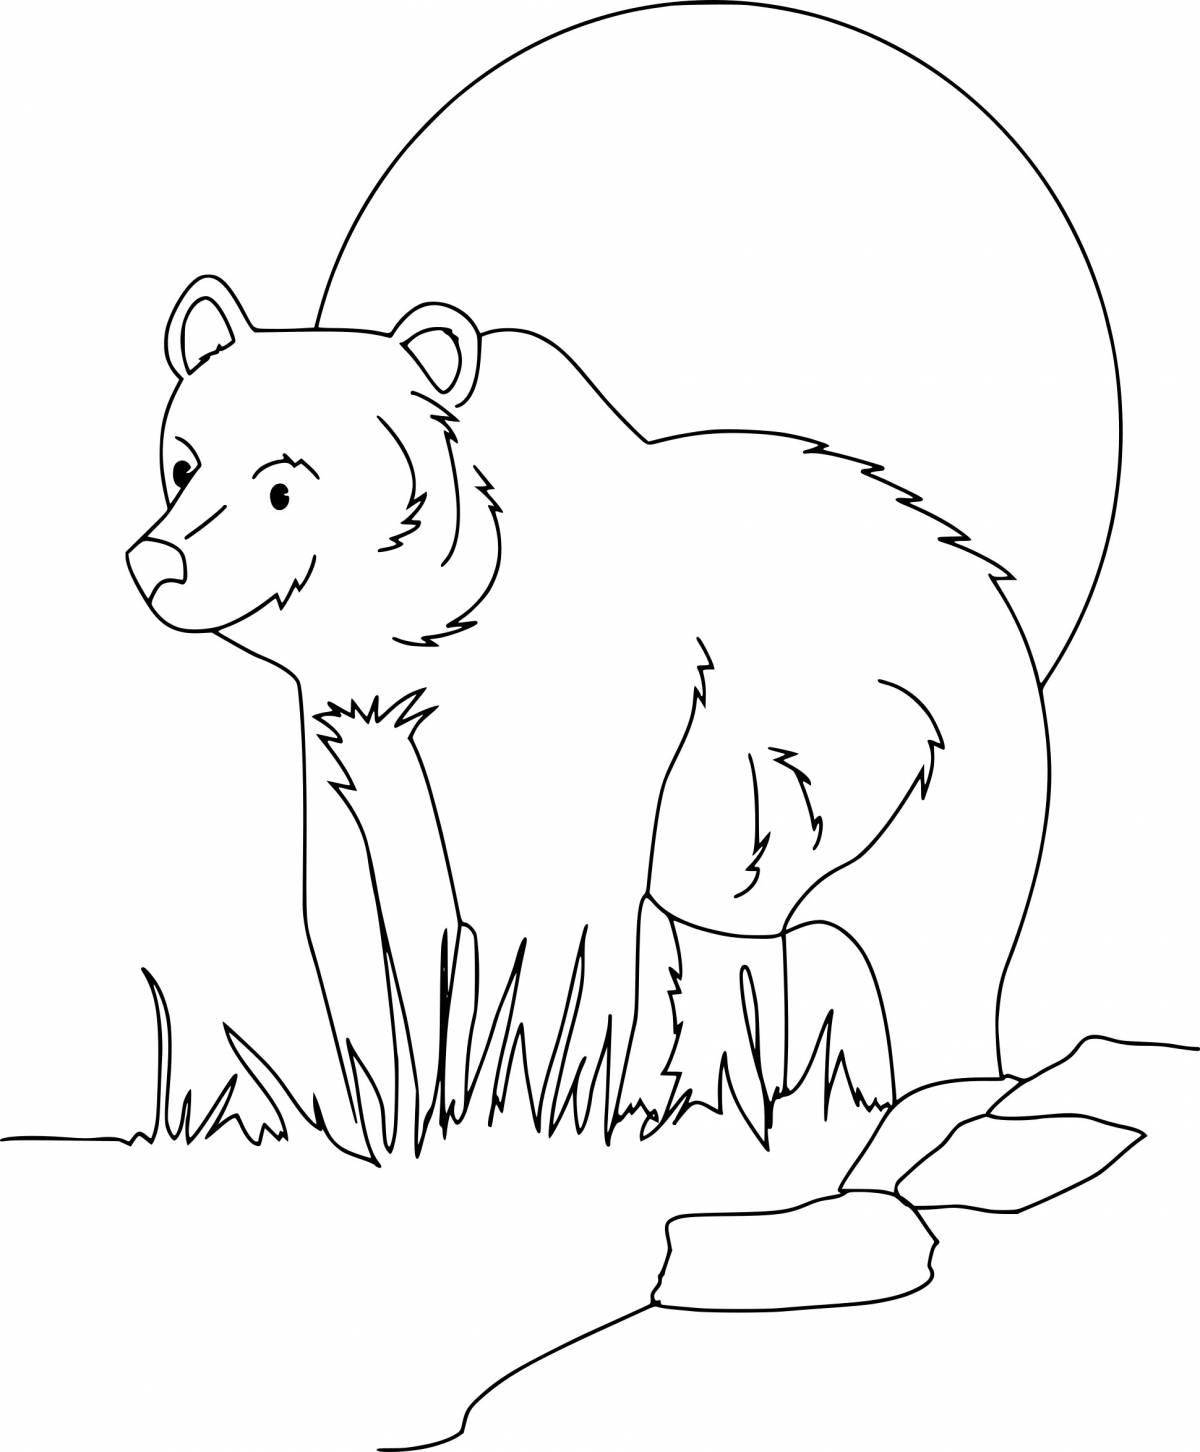 Cute bear and baby coloring book